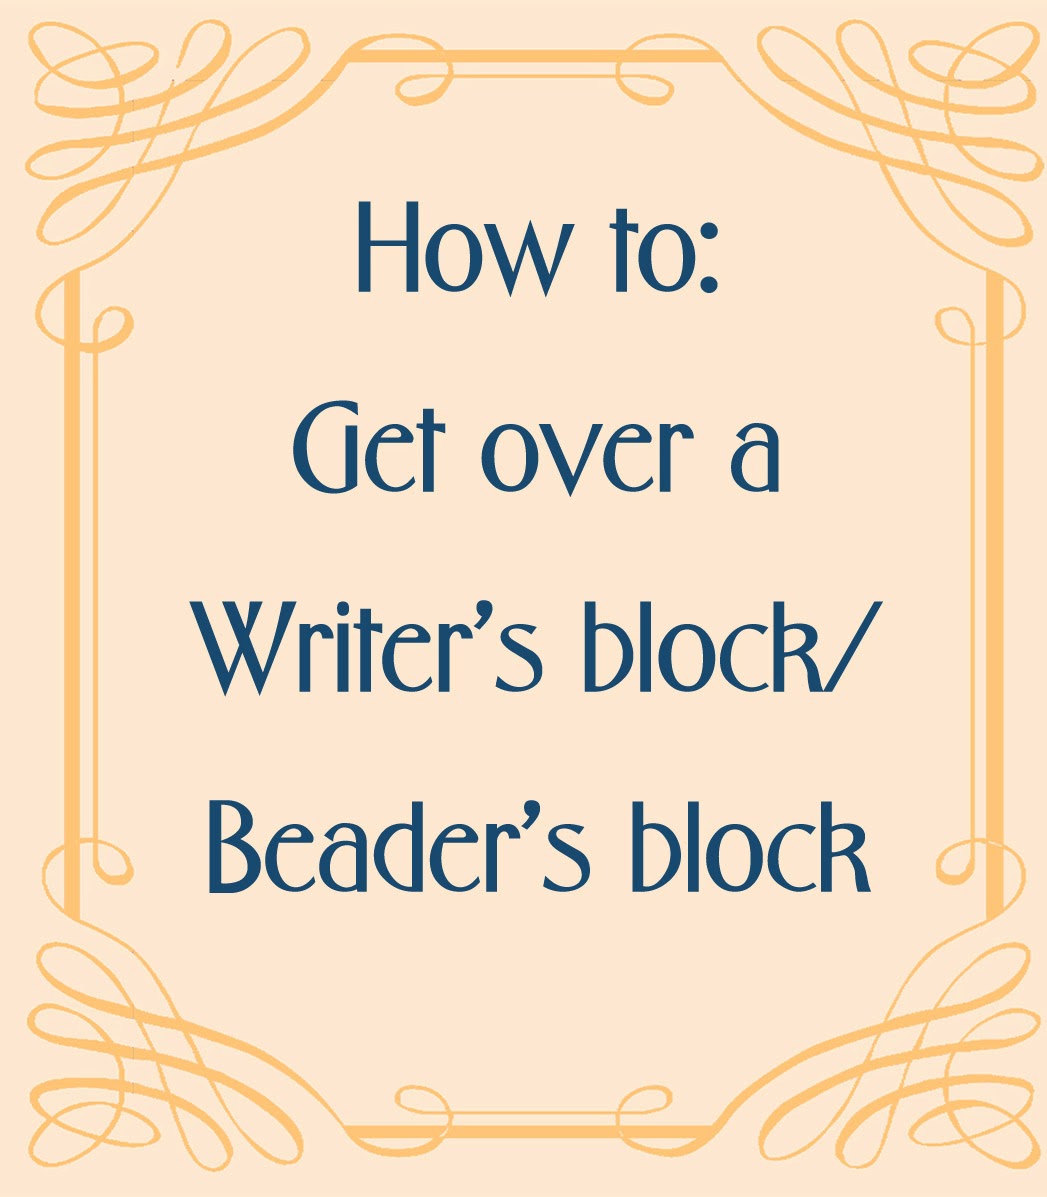 Getting over a writer’s block